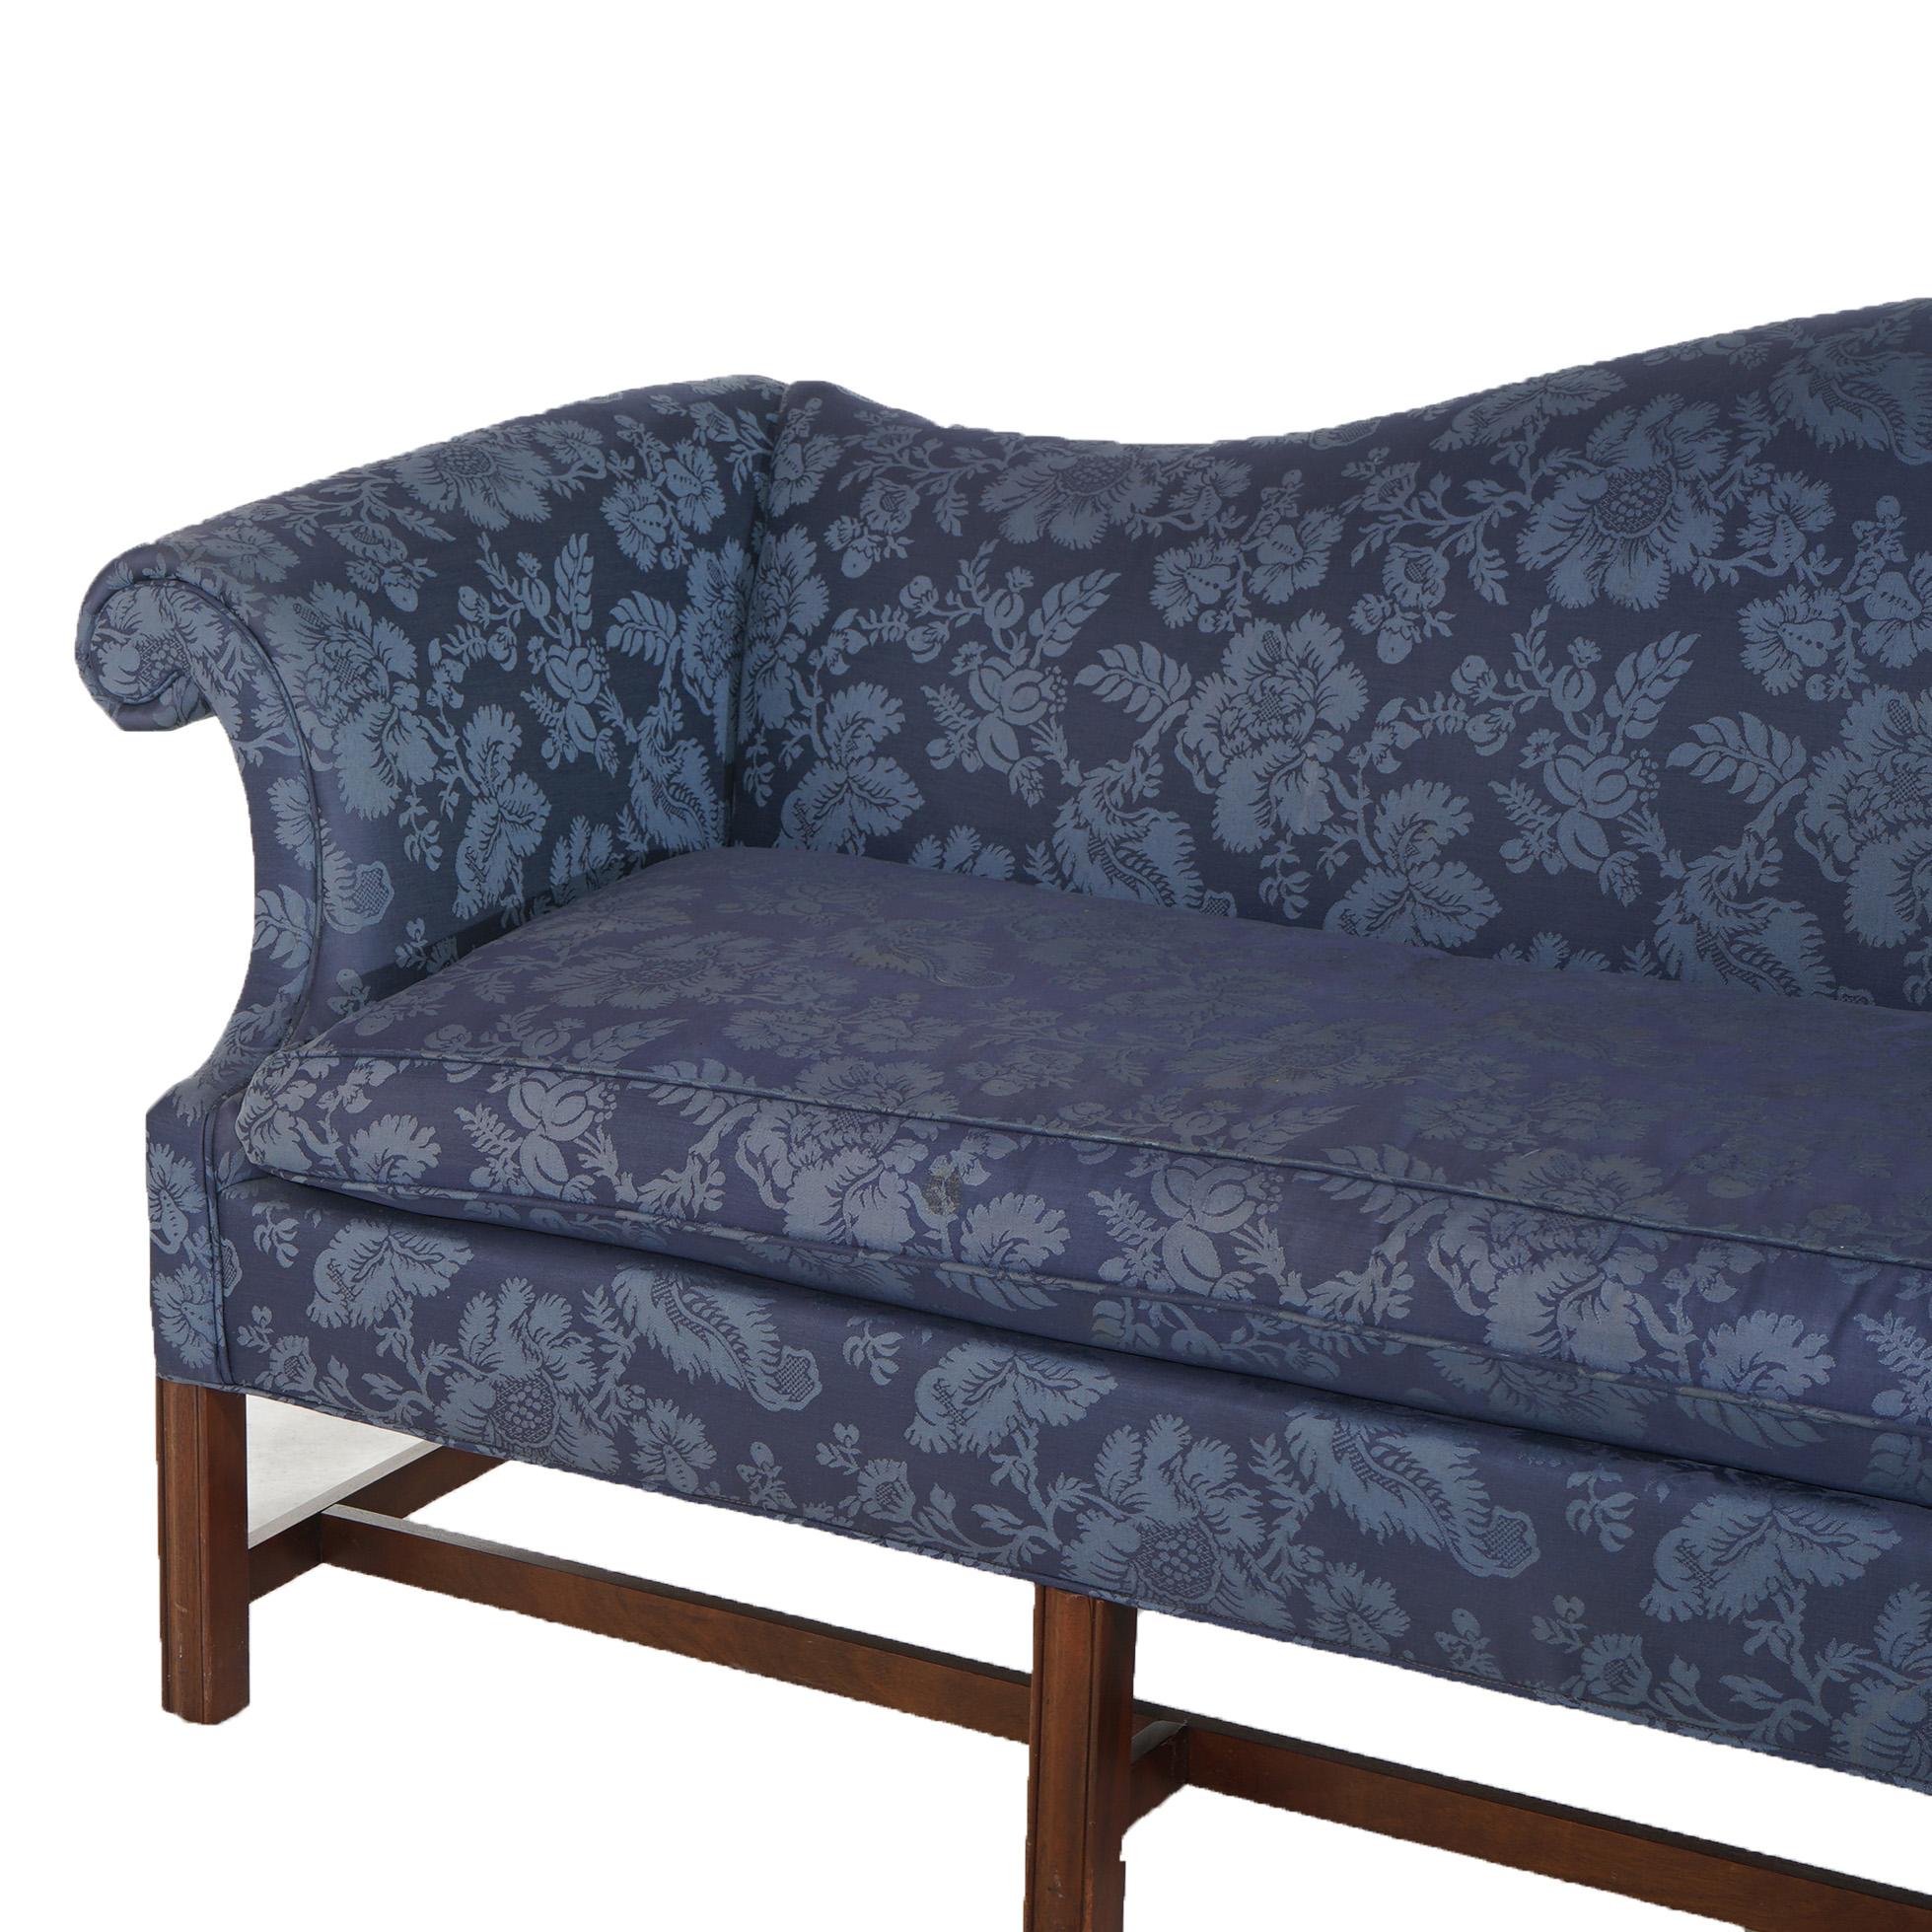 ***Ask About Reduced In-House Delivery Rates - Reliable Professional Service & Fully Insured***
Antique Chippendale Camelback Sofa with Scroll Arms, Blue, C1930

Measures - 35.5